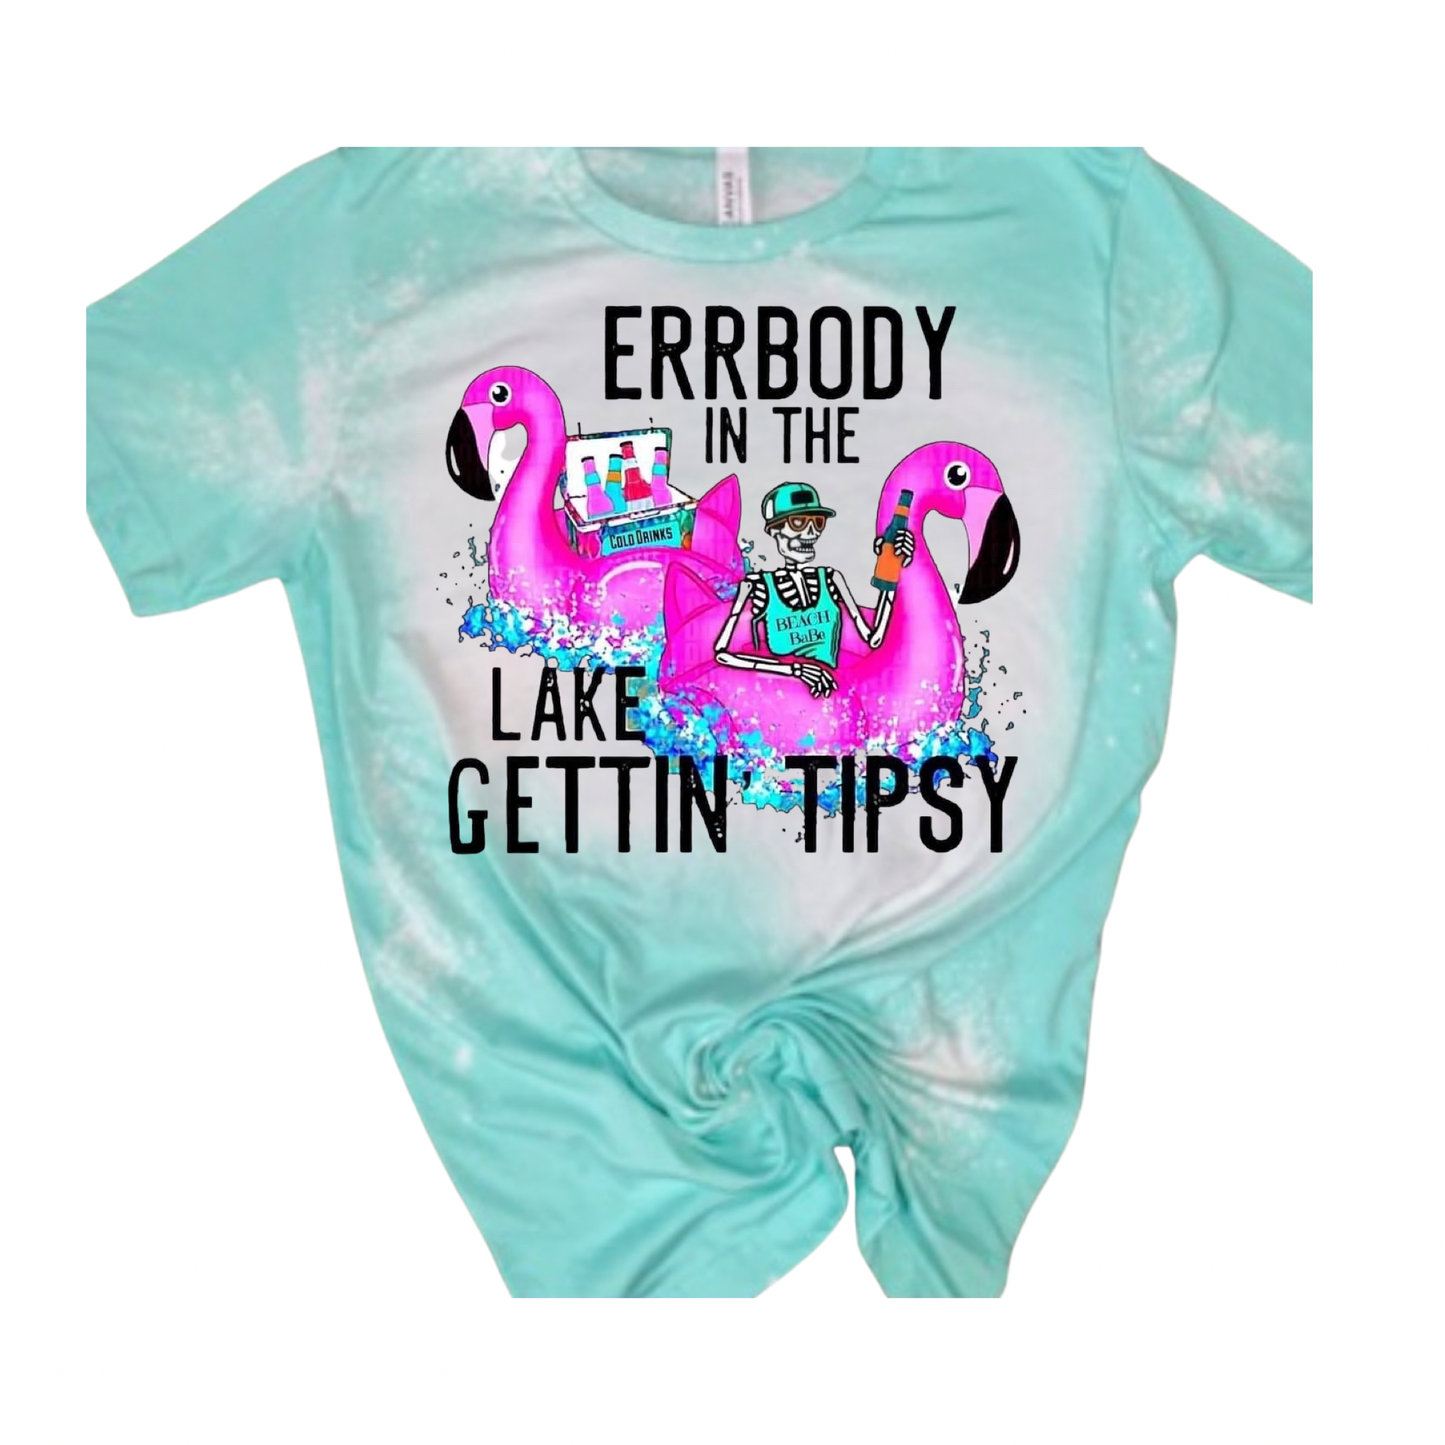 Errbody in the lake getting tipsy tee